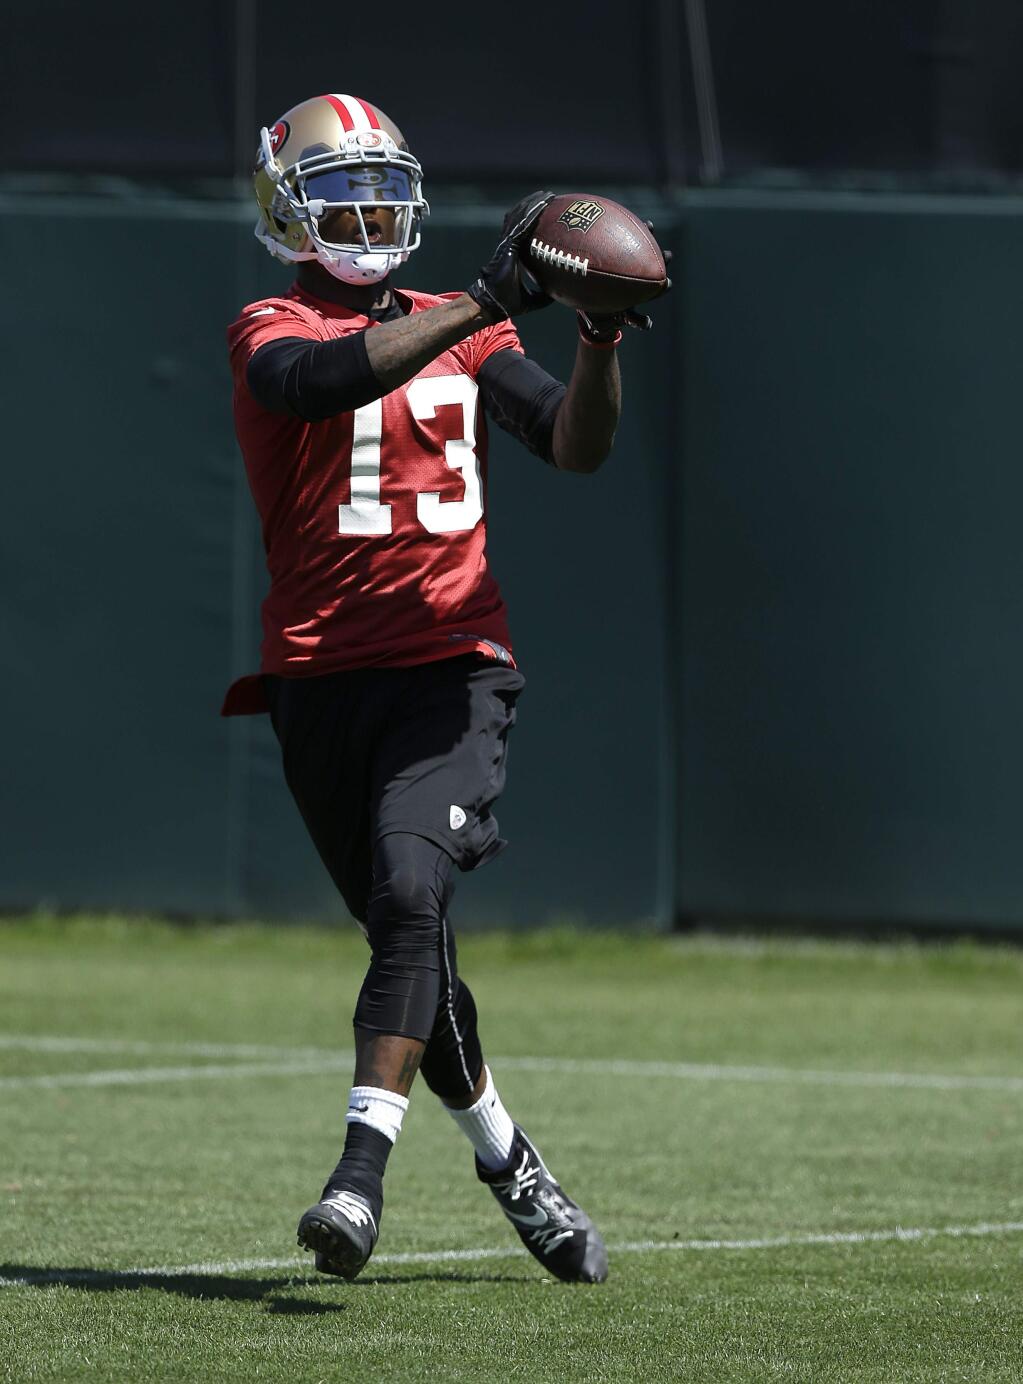 In this June 17, 2014 file photo, San Francisco 49ers wide receiver Stevie Johnson (13) catches a pass during NFL football minicamp in Santa Clara. Johnson had produced three straight 1,000-yard seasons with 23 touchdown catches as Buffalo's most dynamic player in the passing game when that streak ended in frustrating fashion last year. There were injuries and the unexpected death of his mother. Now he has a chance to start a new streak with his new team, back home in the Bay Area. (AP Photo/Jeff Chiu, File)